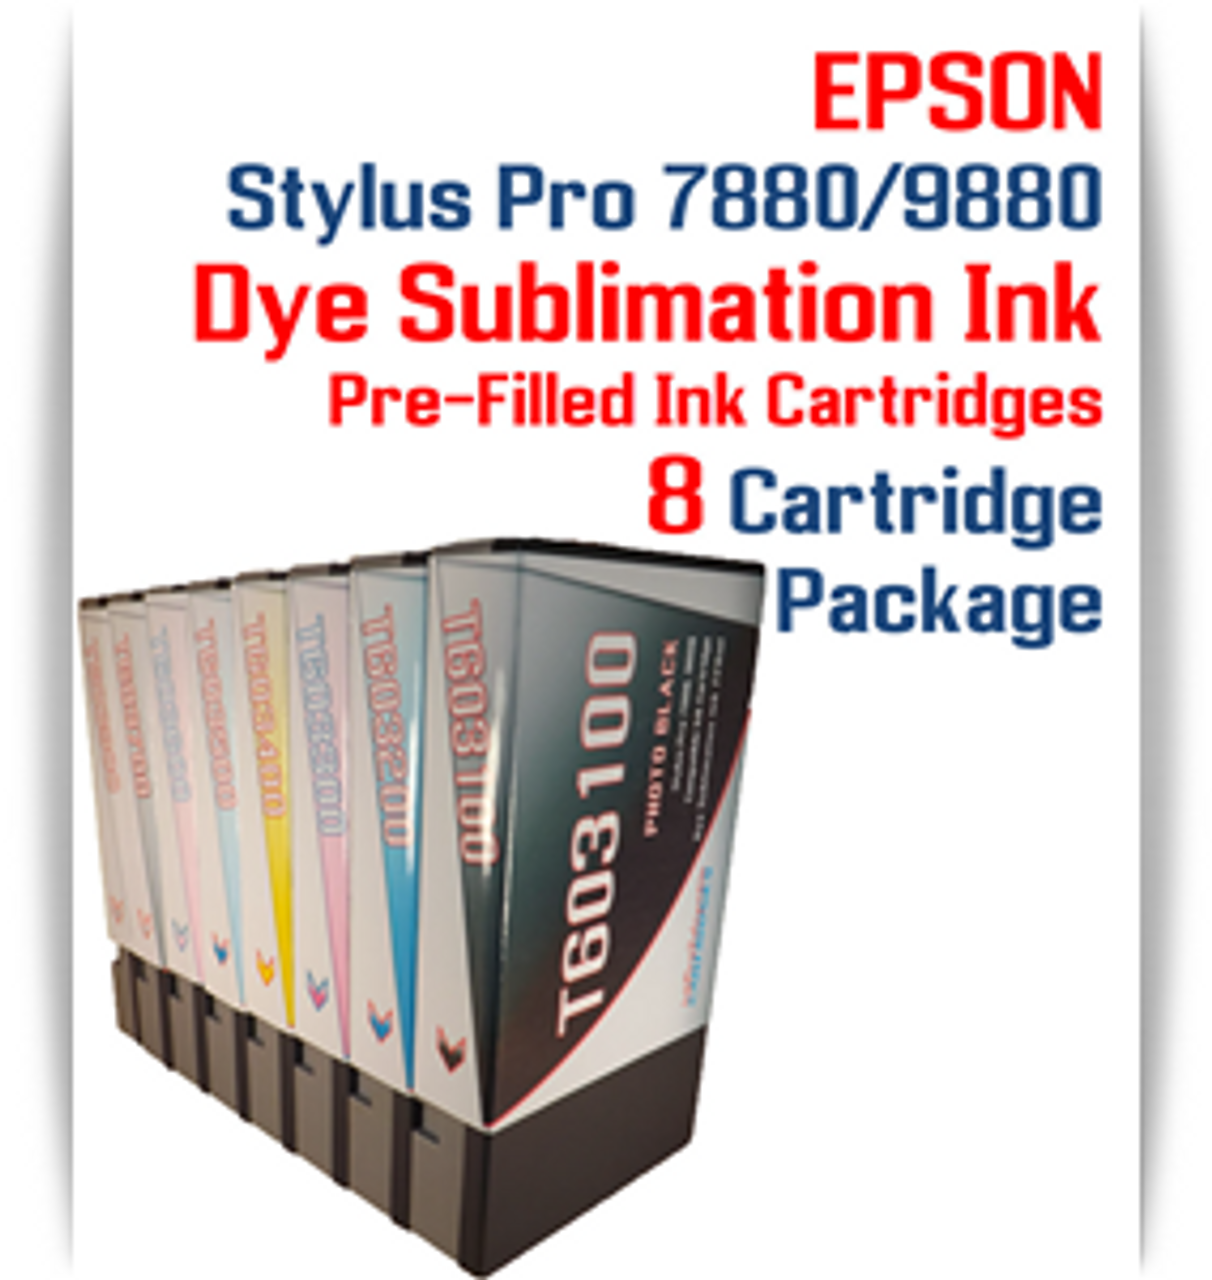 8 Cartridges - Epson Stylus Pro 7880/9880 Pre-Filled with Dye Sublimation Ink Cartridges 220ml each